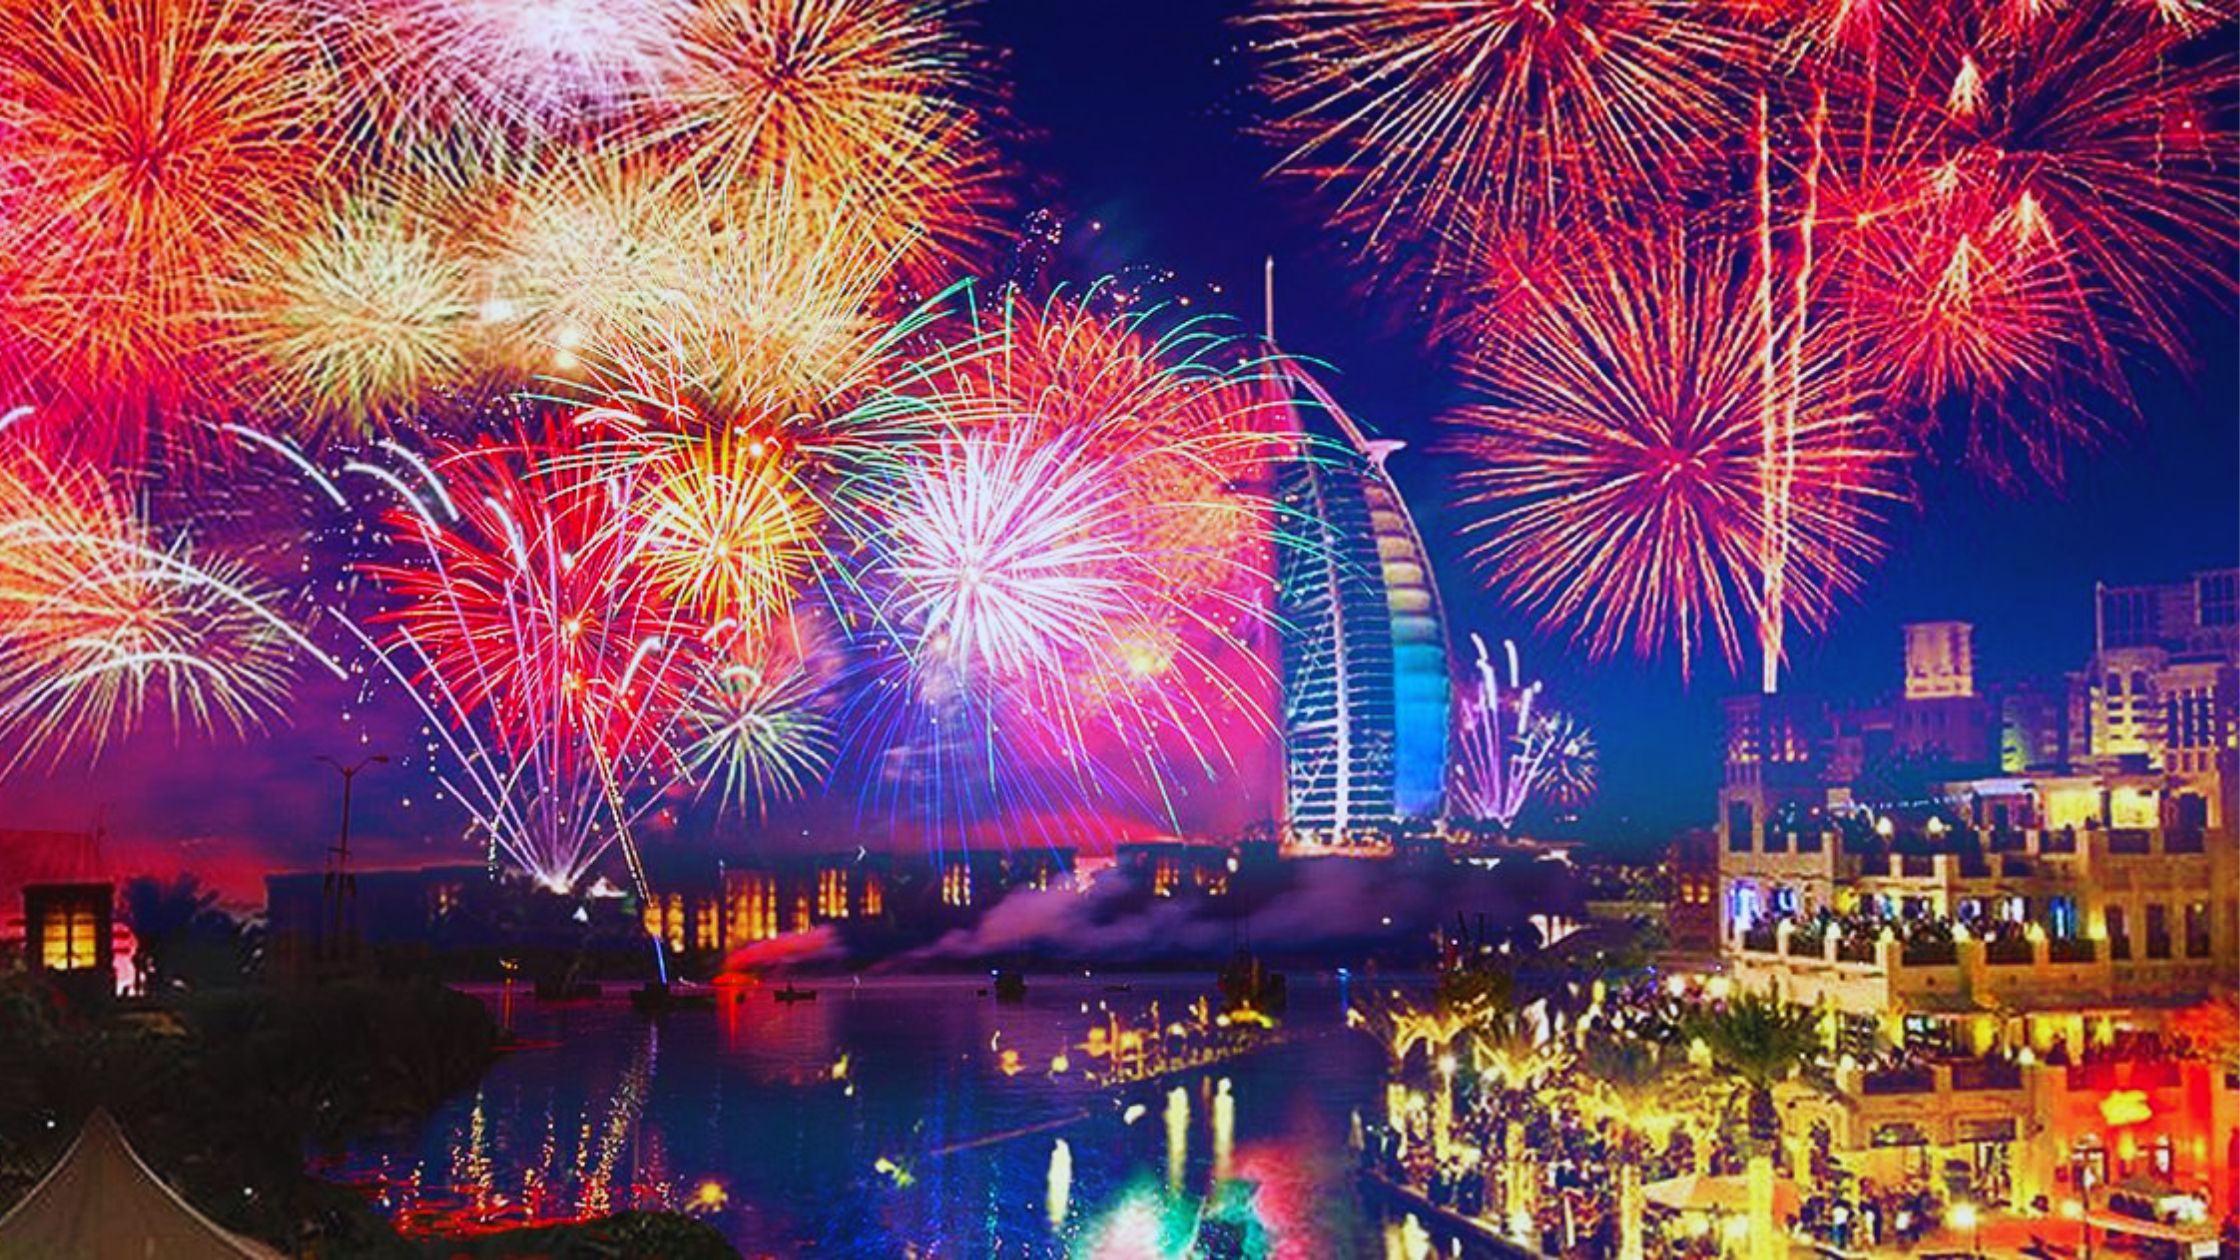 A colorful fireworks display over the Dubai skyline during the New Year celebrations